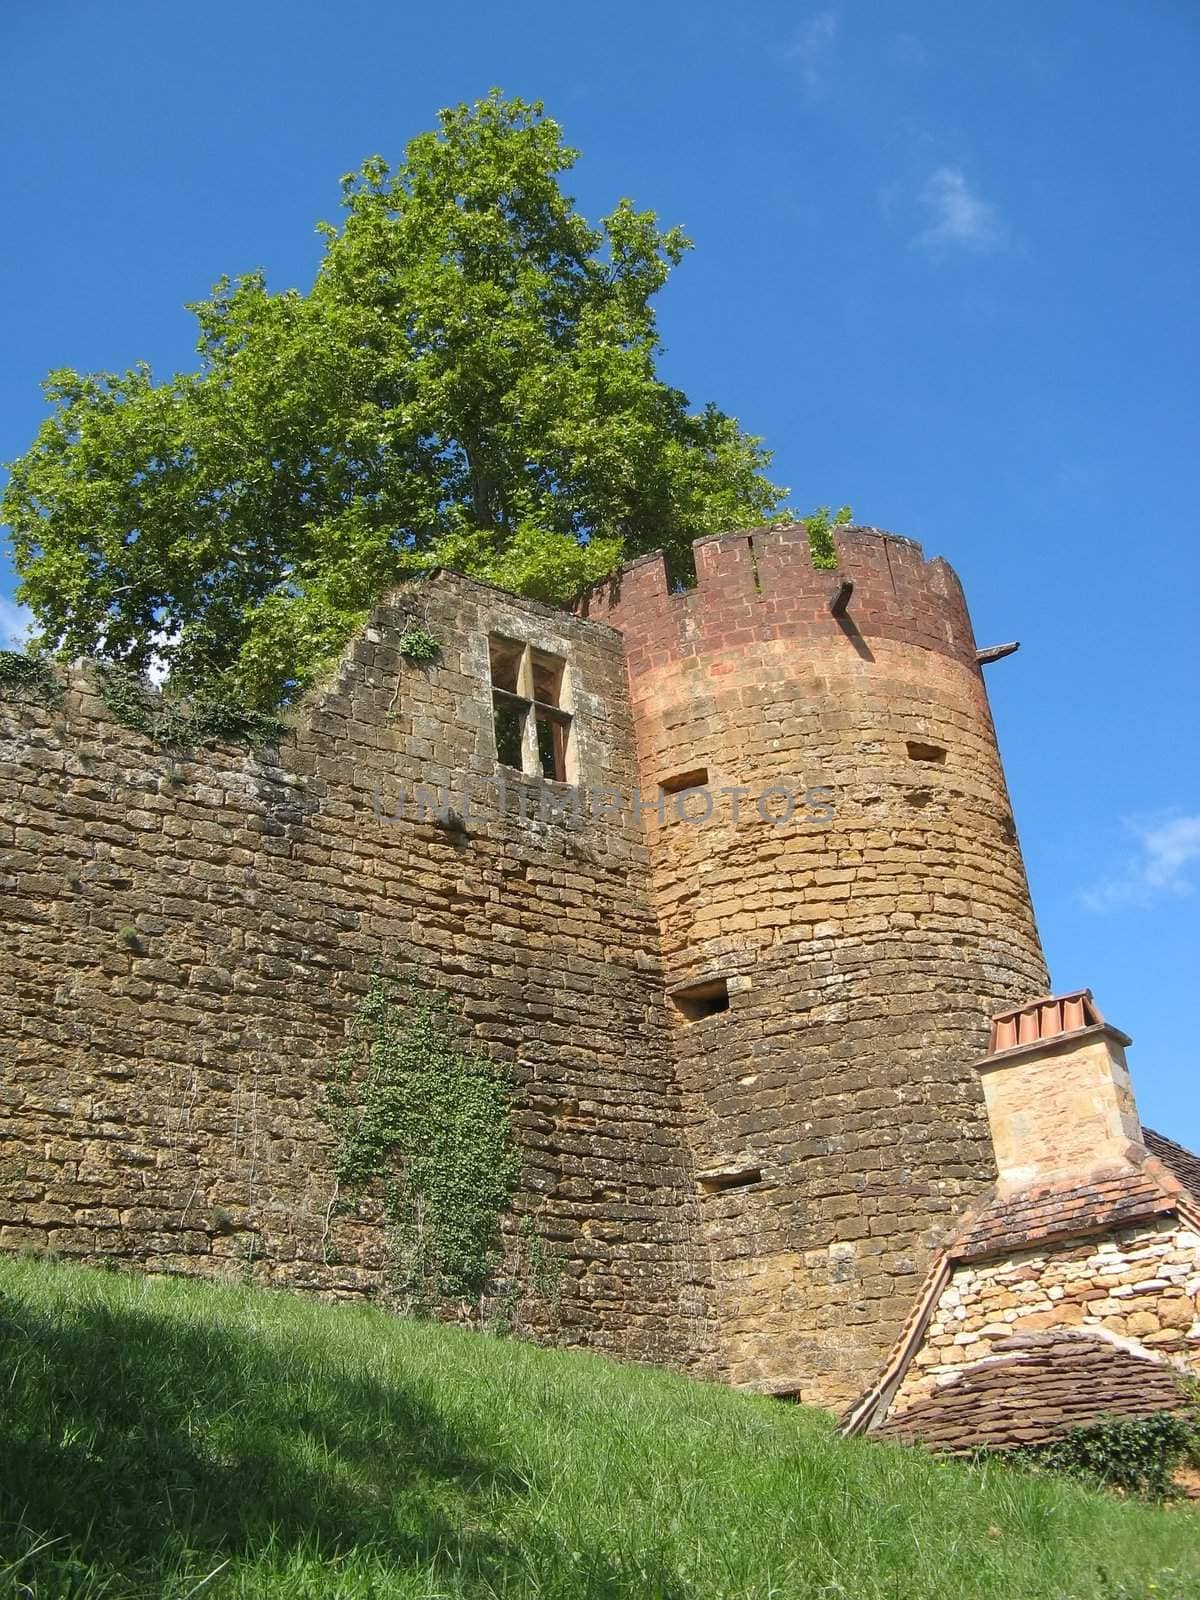 an image of the medieval castle of Castelnaud in France